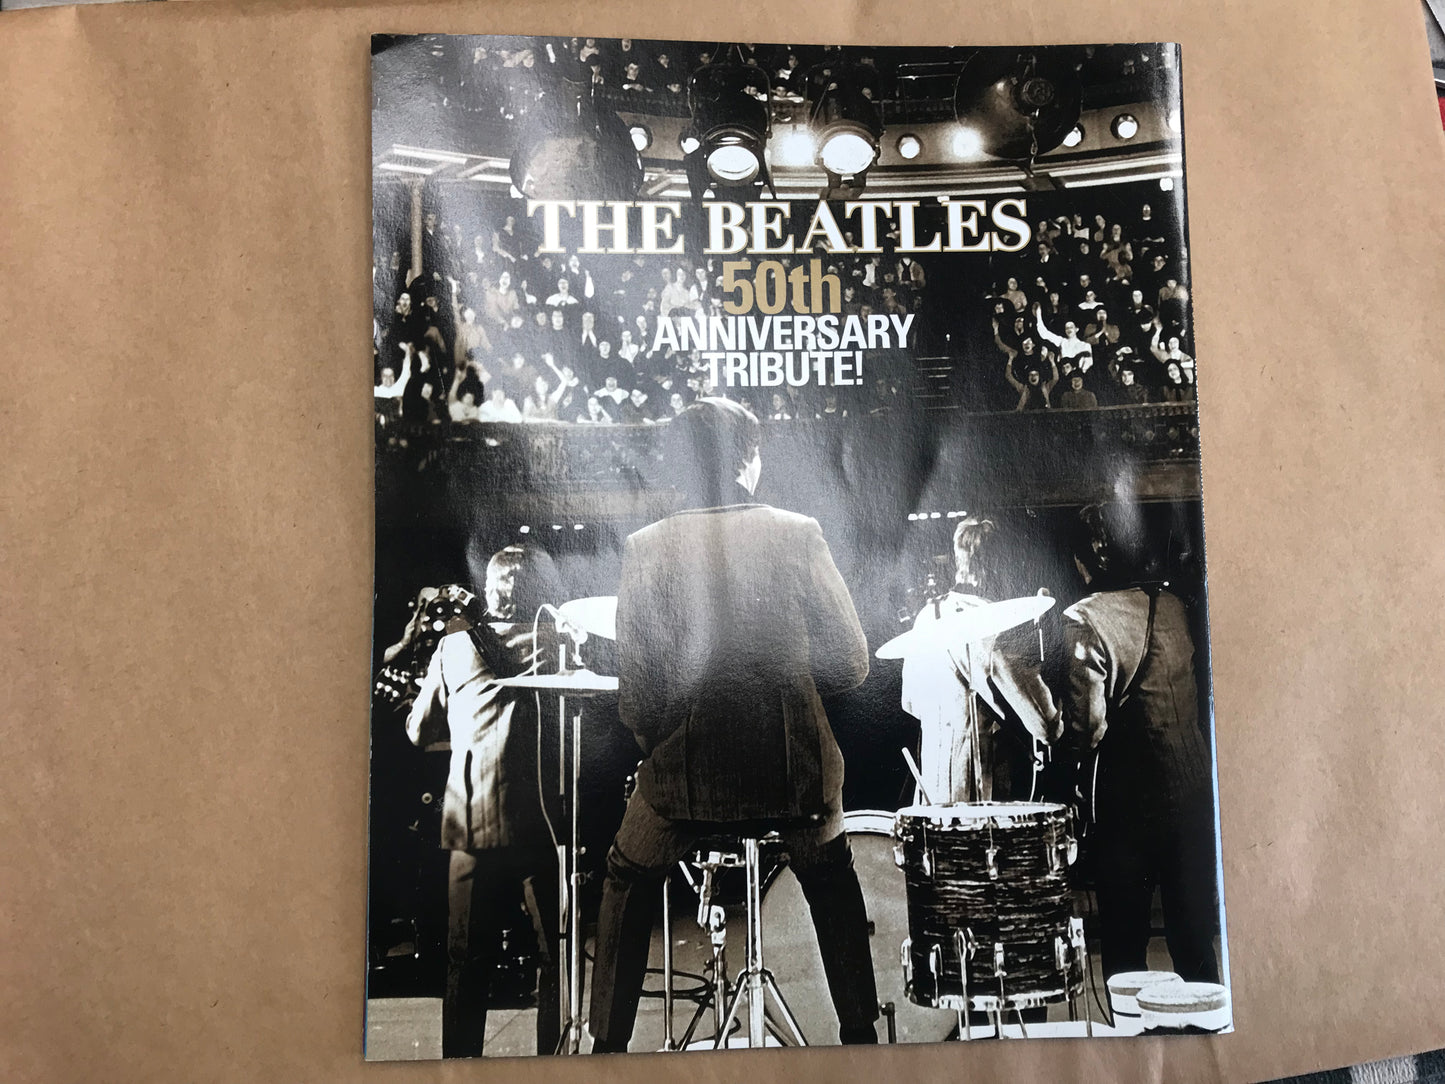 Life Story The Beatles Deluxe Collector's Edition 50th Anniversary Magazine